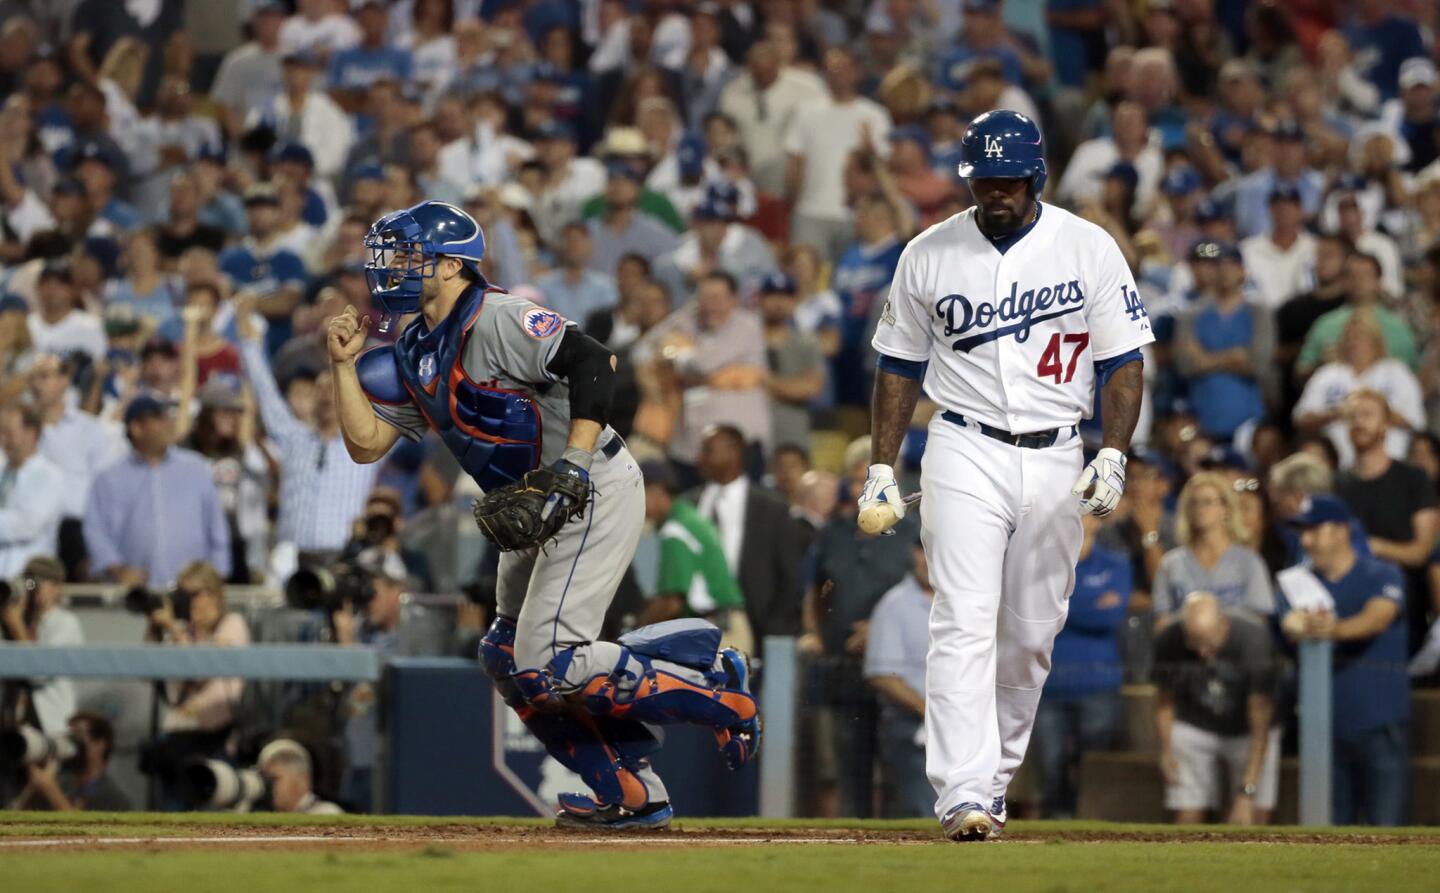 Mets catcher Travis d'Arnaud runs to celebrate with teammates after Dodgers second baseman Howie Kendrick struck out to end Game 5 of the National League division series on Thursday night at Dodger Stadium.